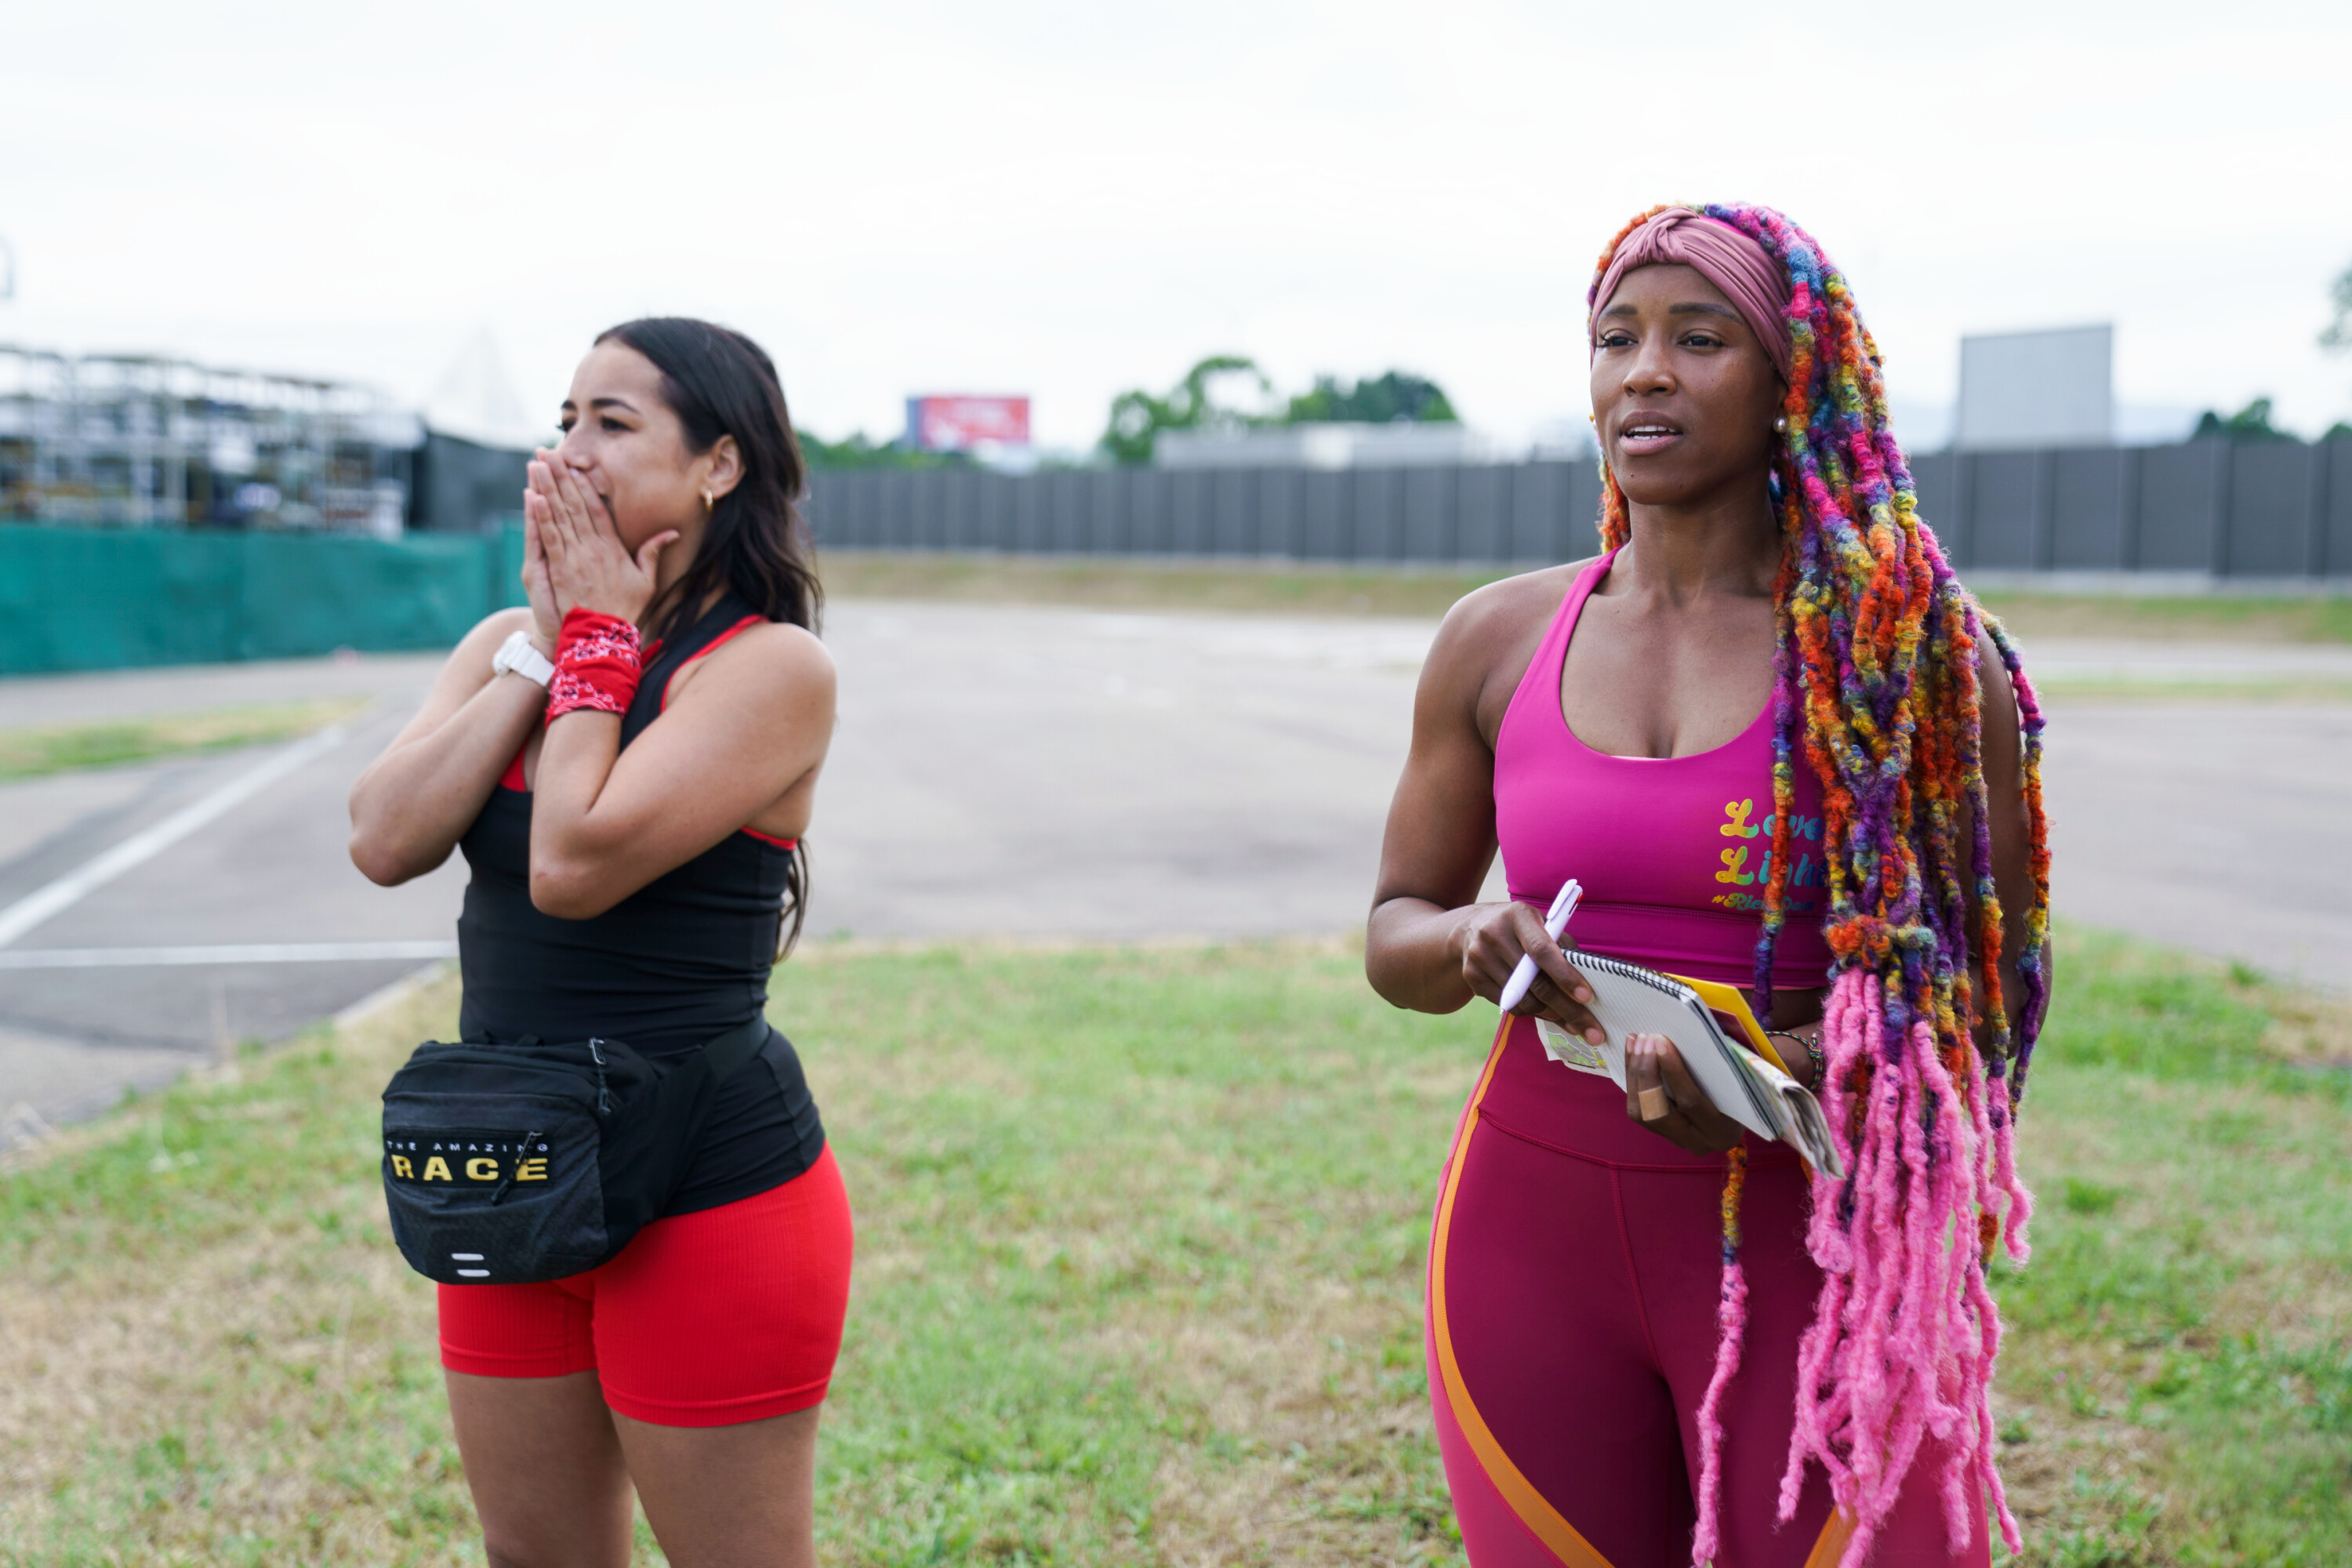 ‘The Amazing Race’ Season 34 Predictions: Who Will Finish Last in Tonight’s Episode?